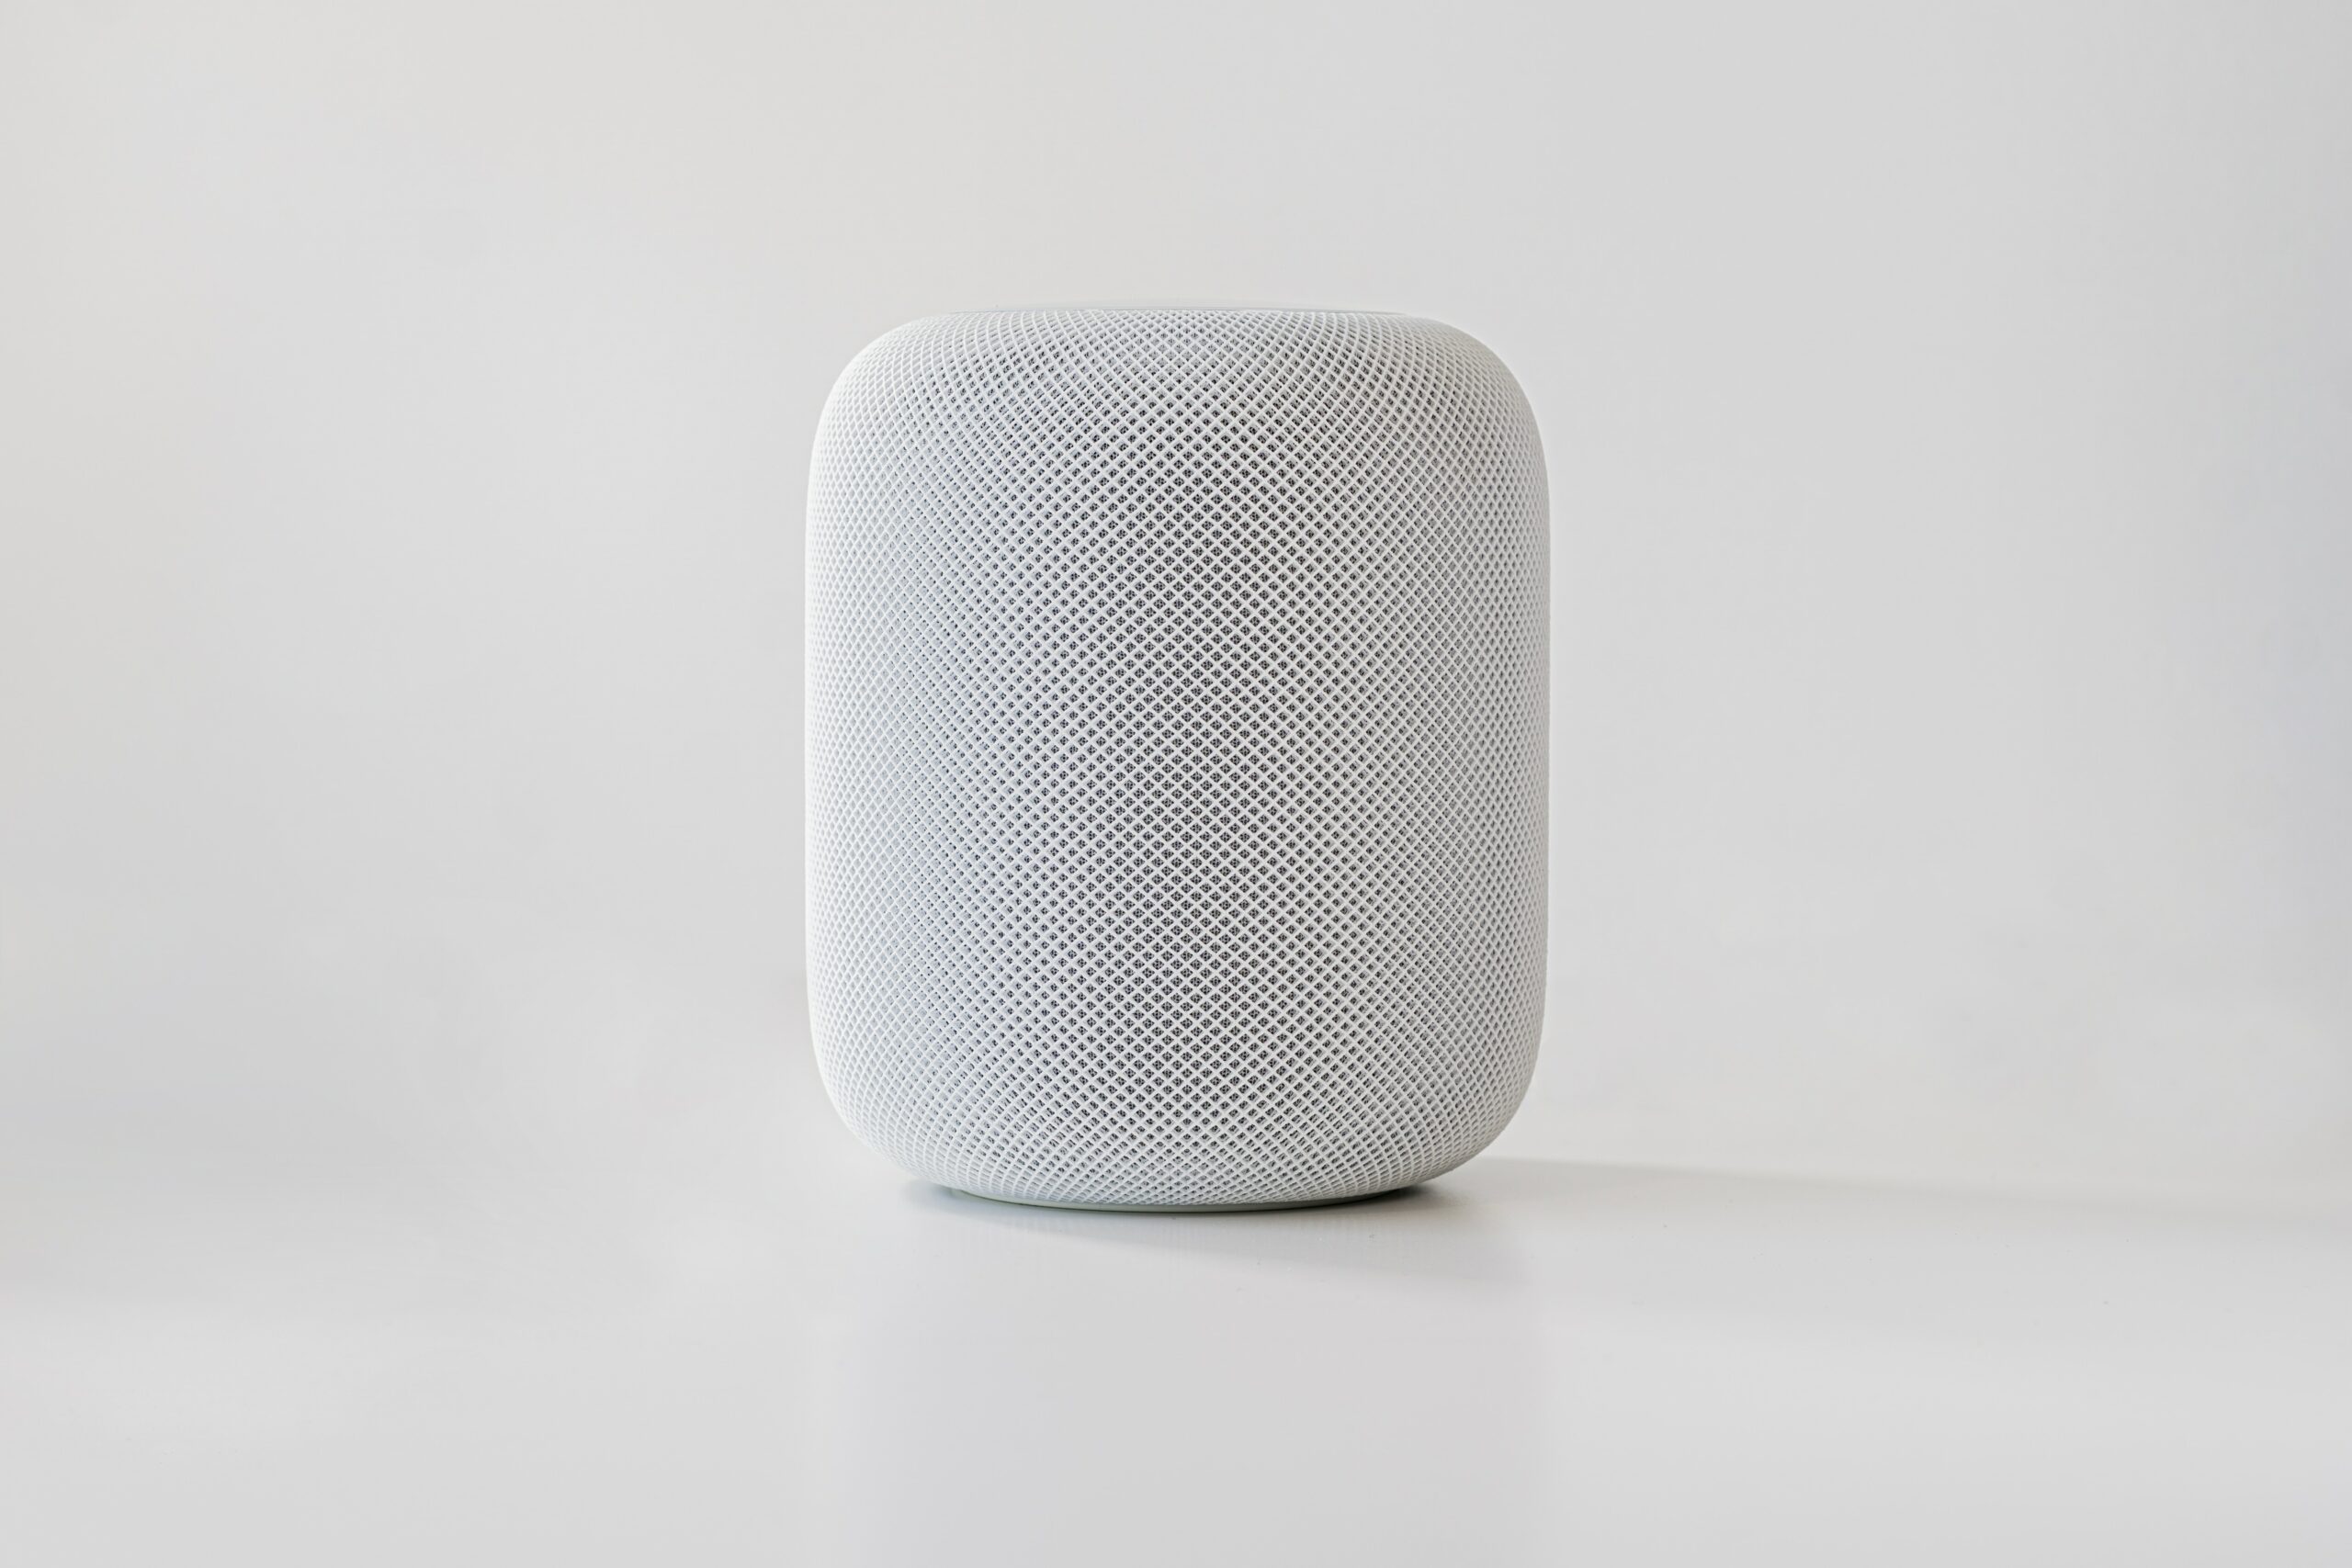 How to Add & Delete a Reminder with HomePod